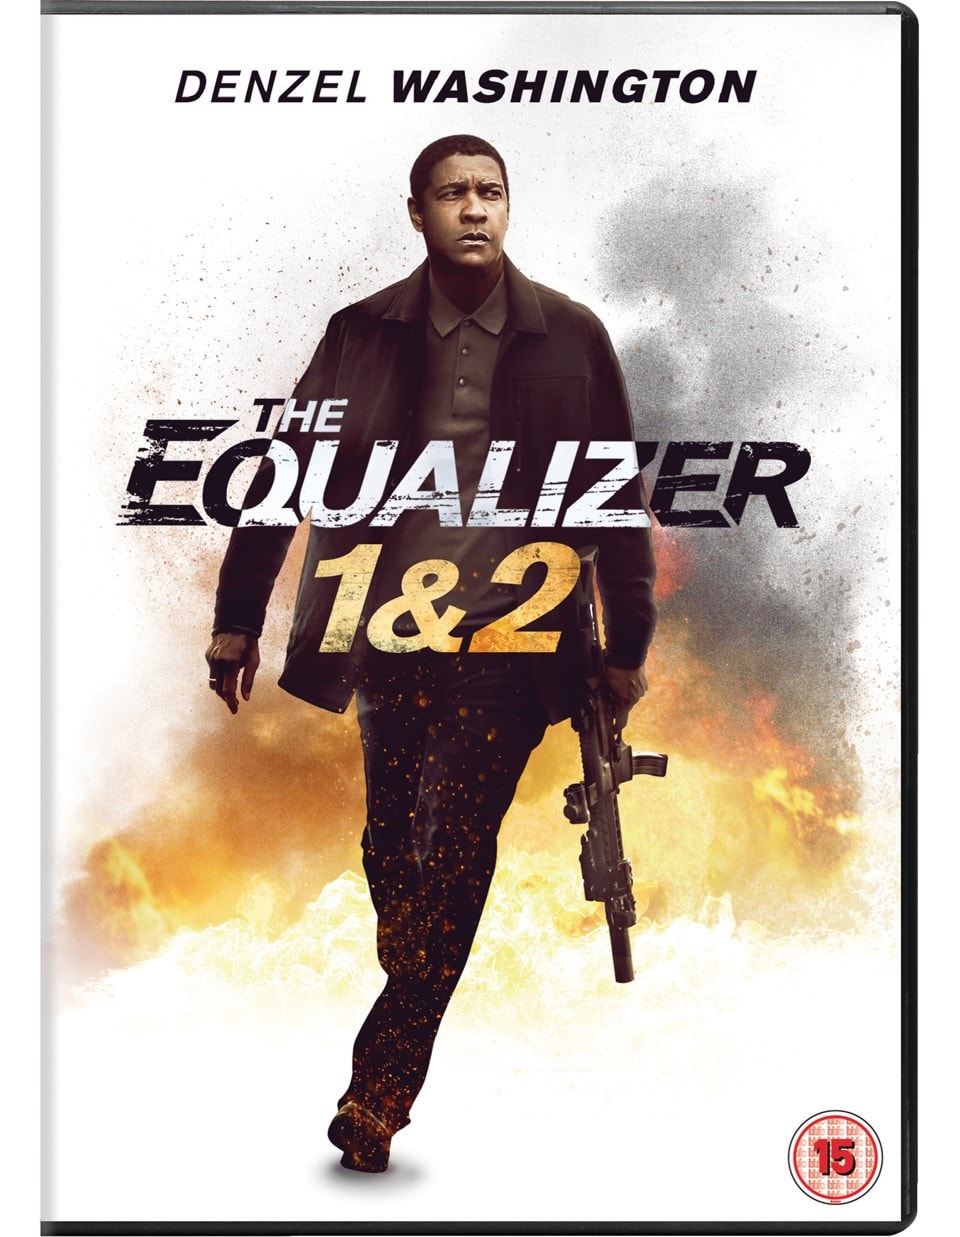 the equalizer 2 online free